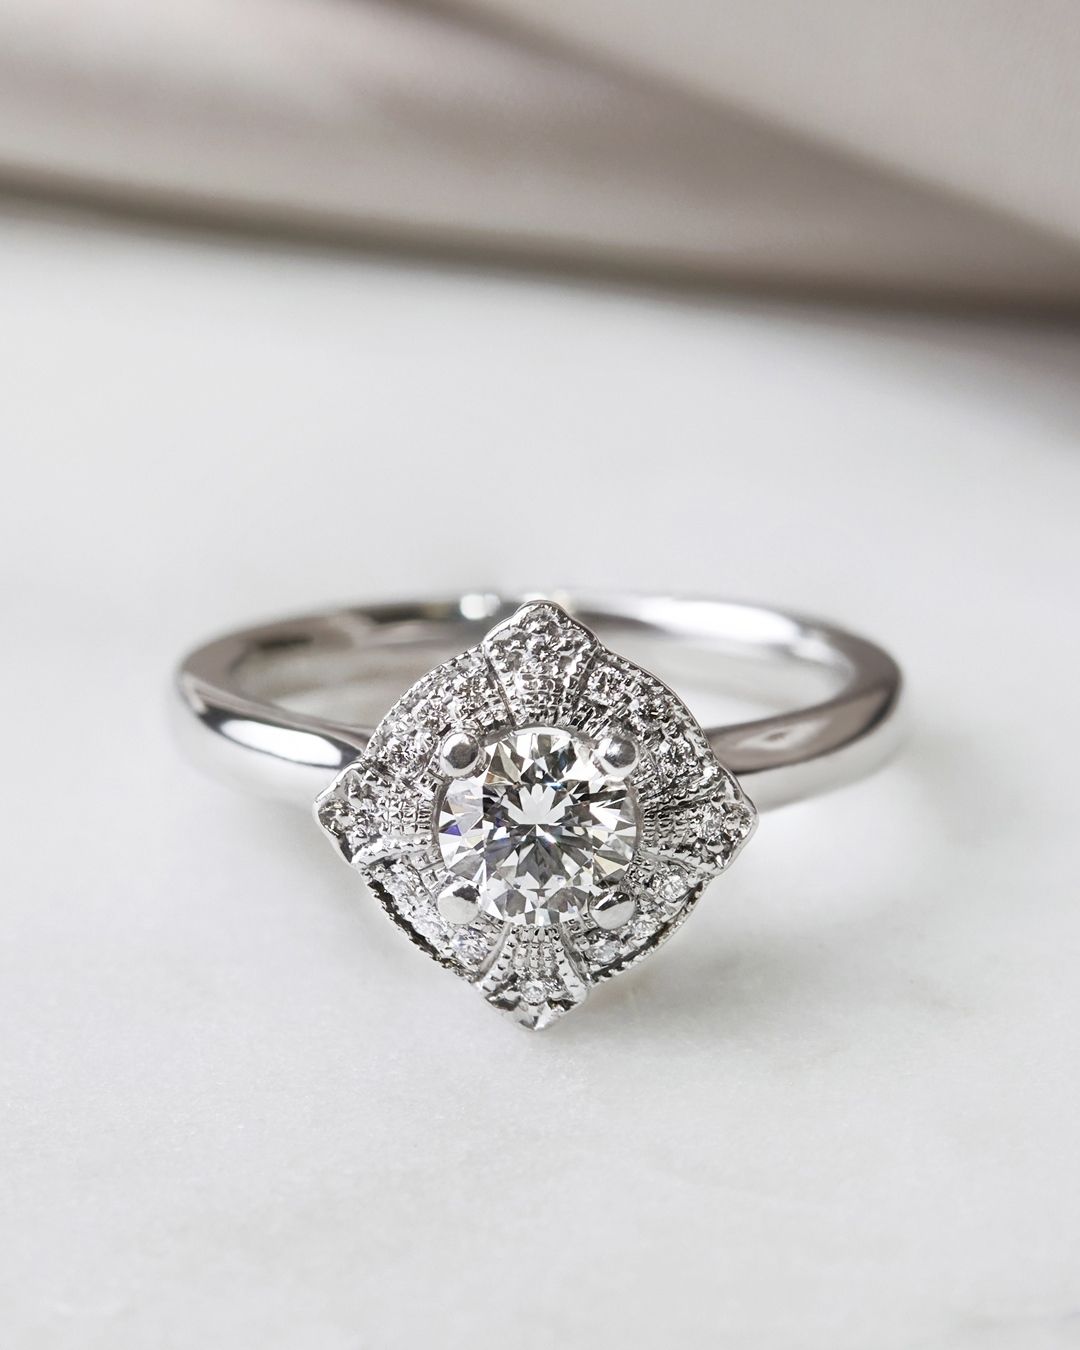 Vintage and antique engagement rings